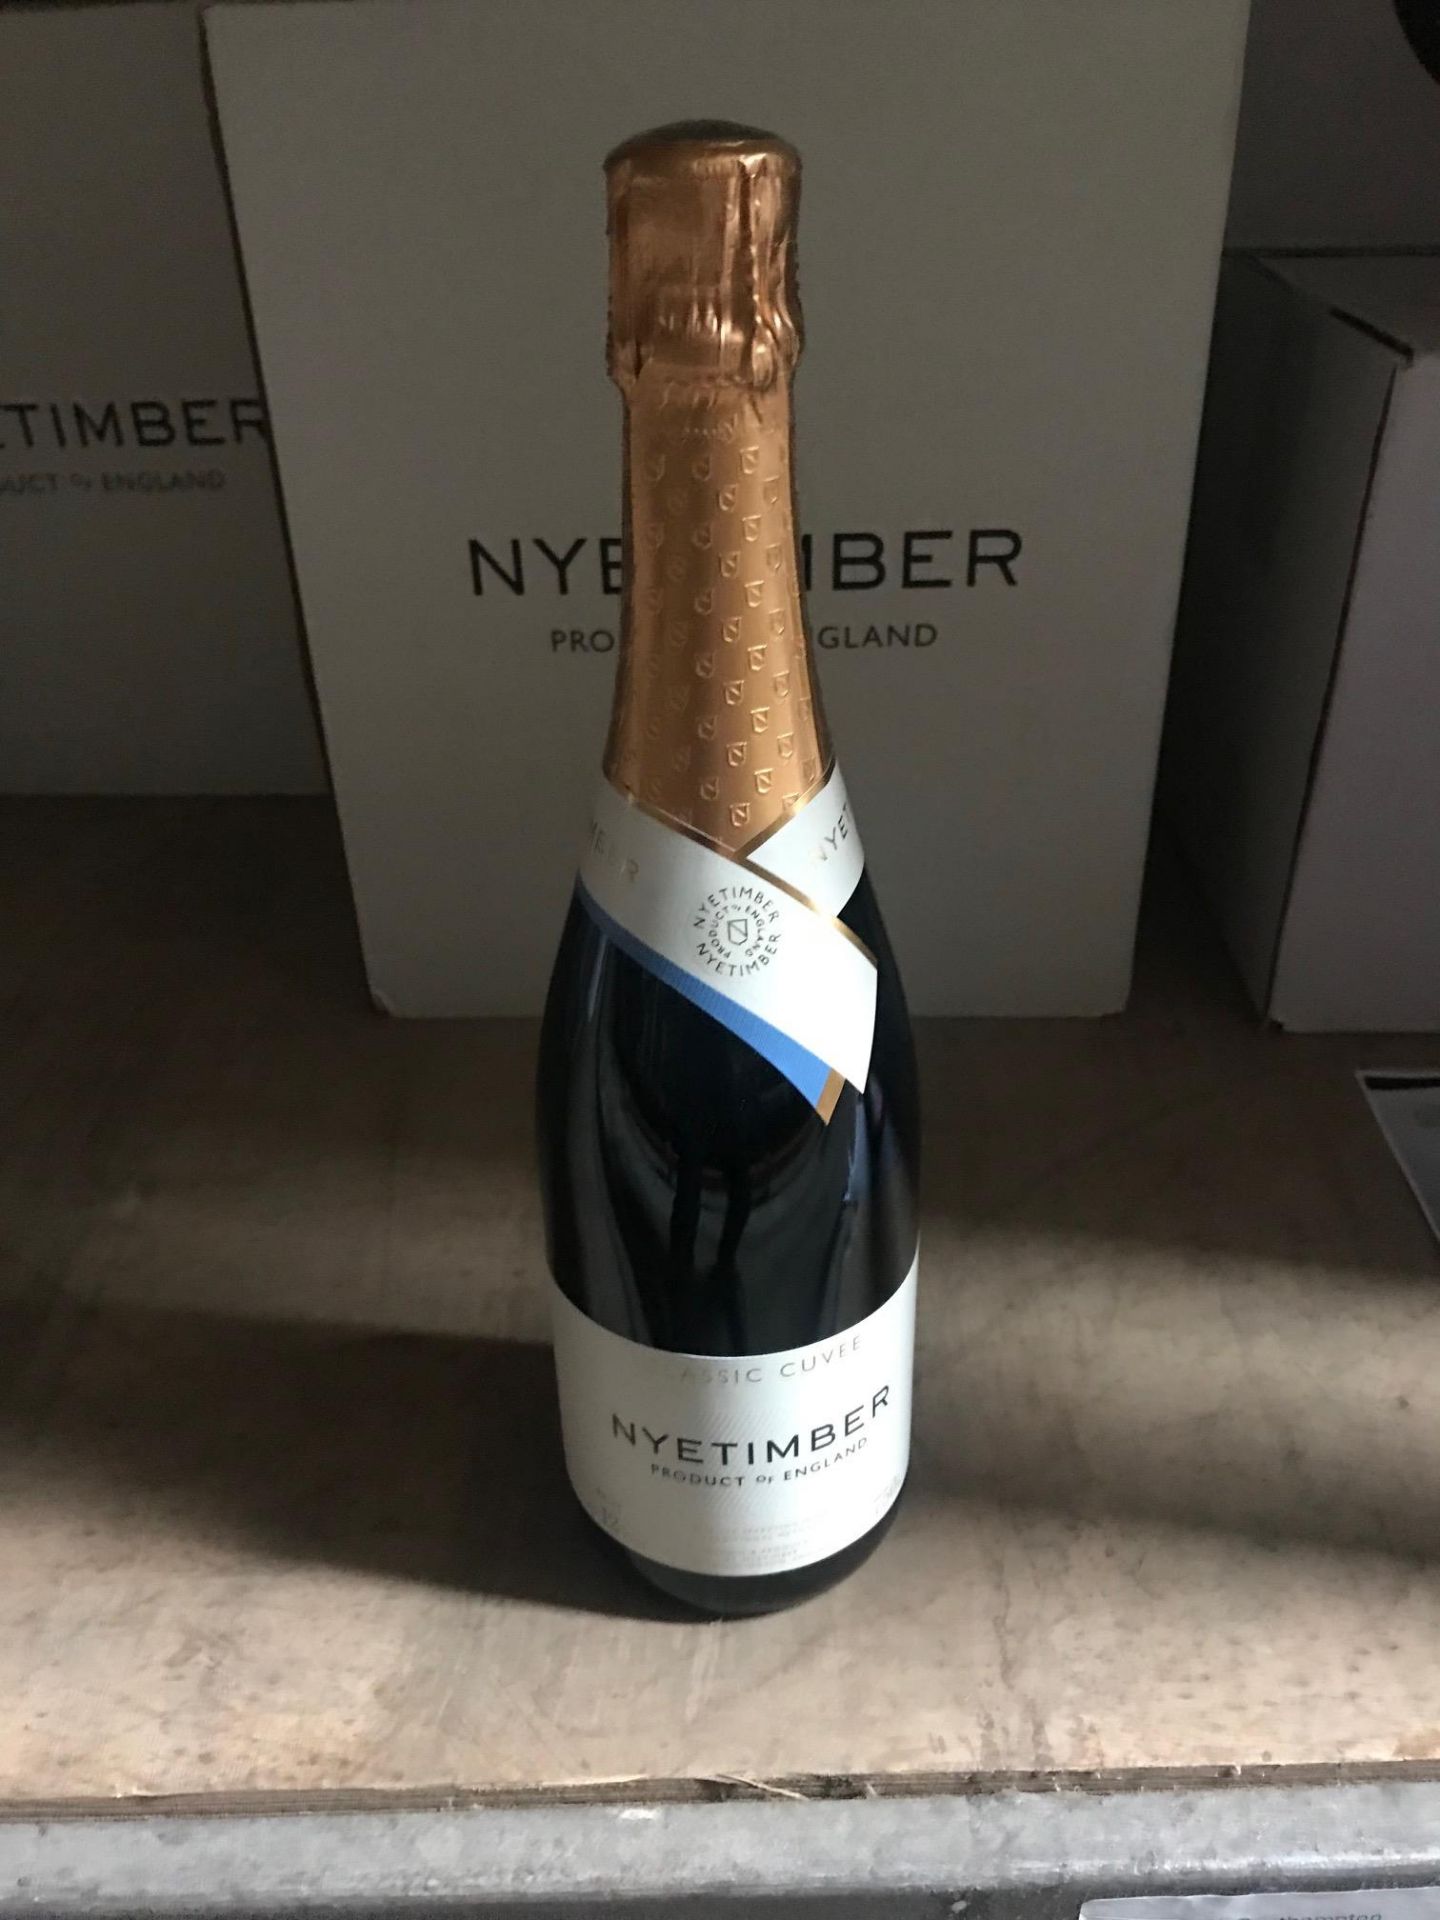 (54) Bottles of Nyetimber Classic Cuvee (75cl)